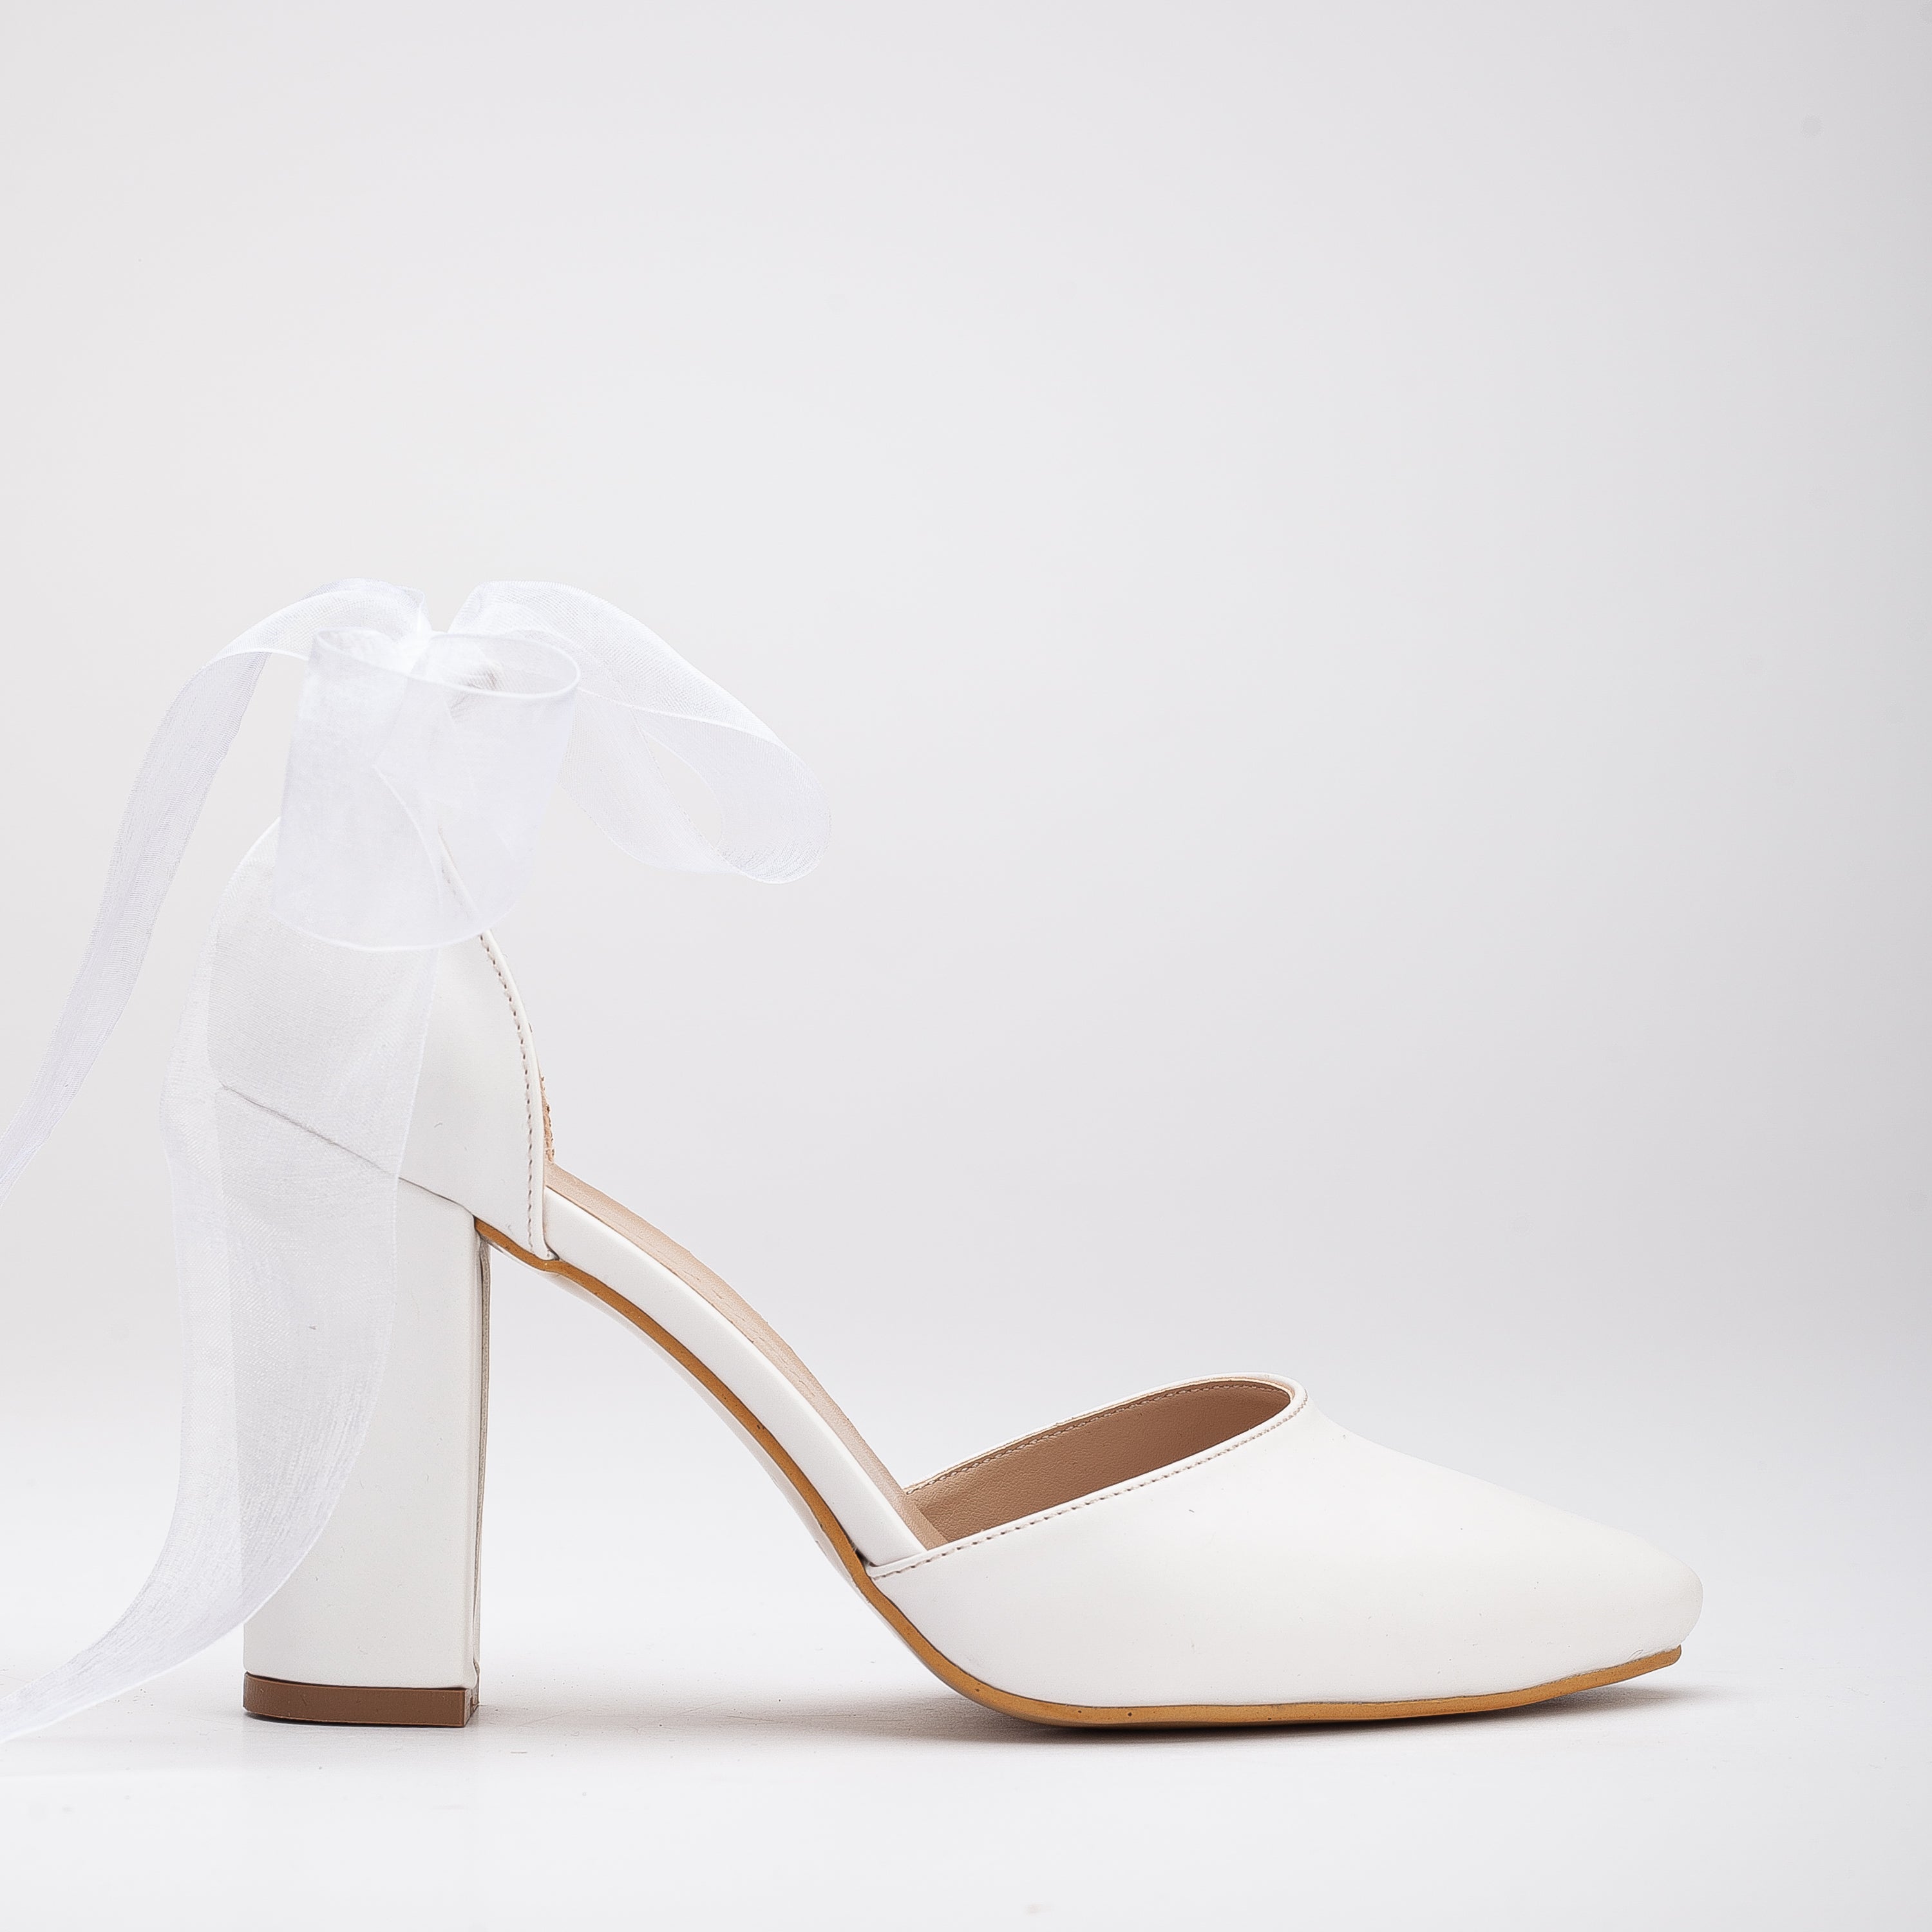 The Best & Most Comfortable Wedding Heels for Bridesmaids | by VICE VERSA |  Medium